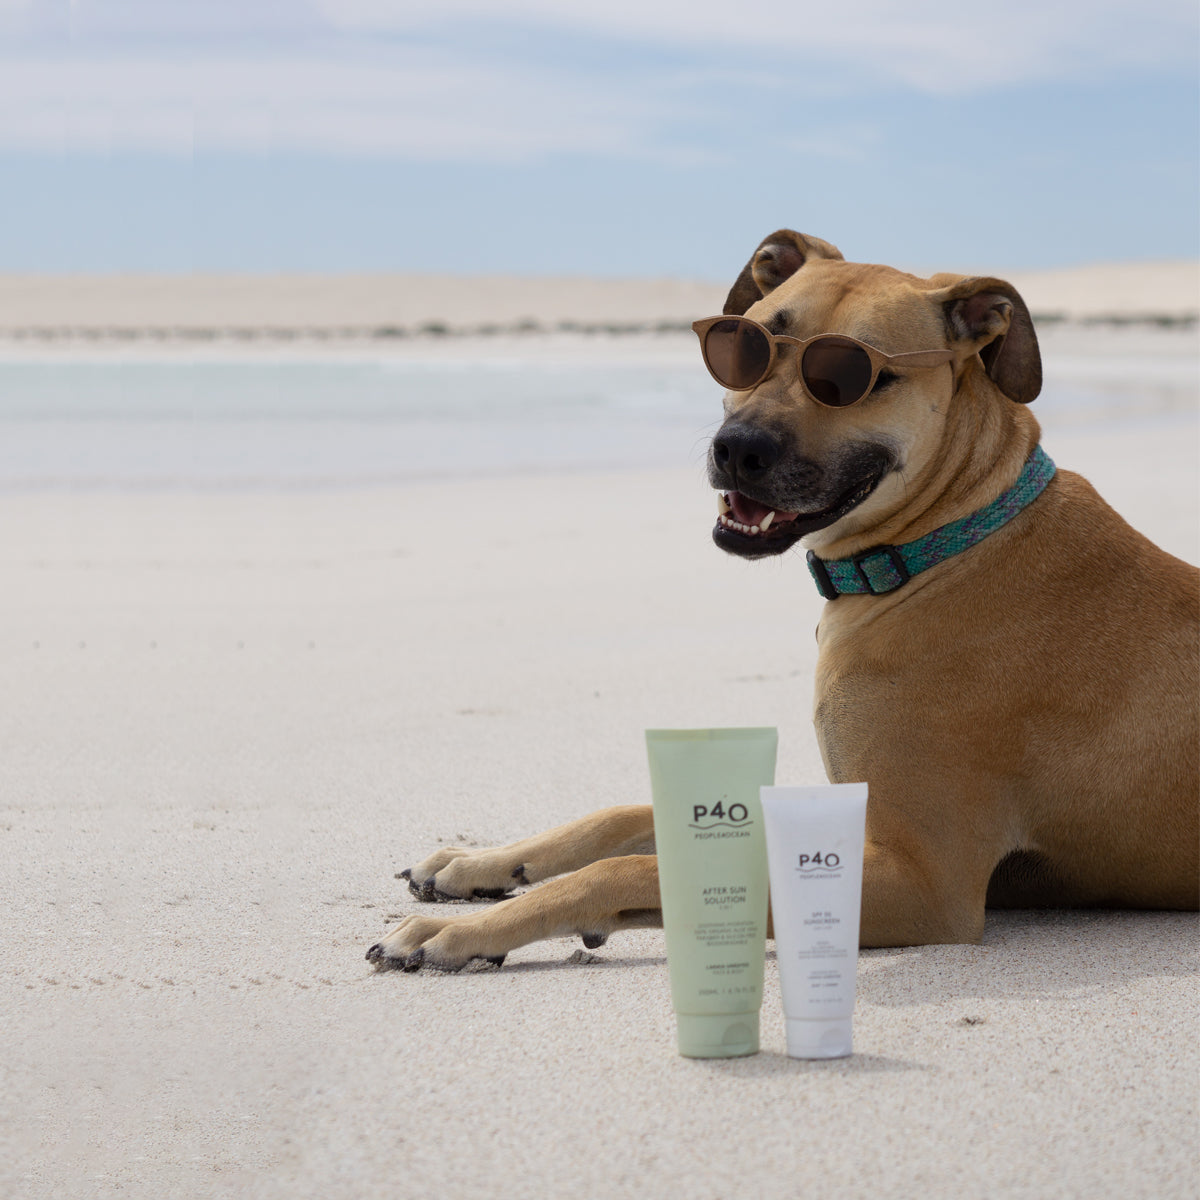 Cruelty Free Sunscreen: How to Find a Product with Principles